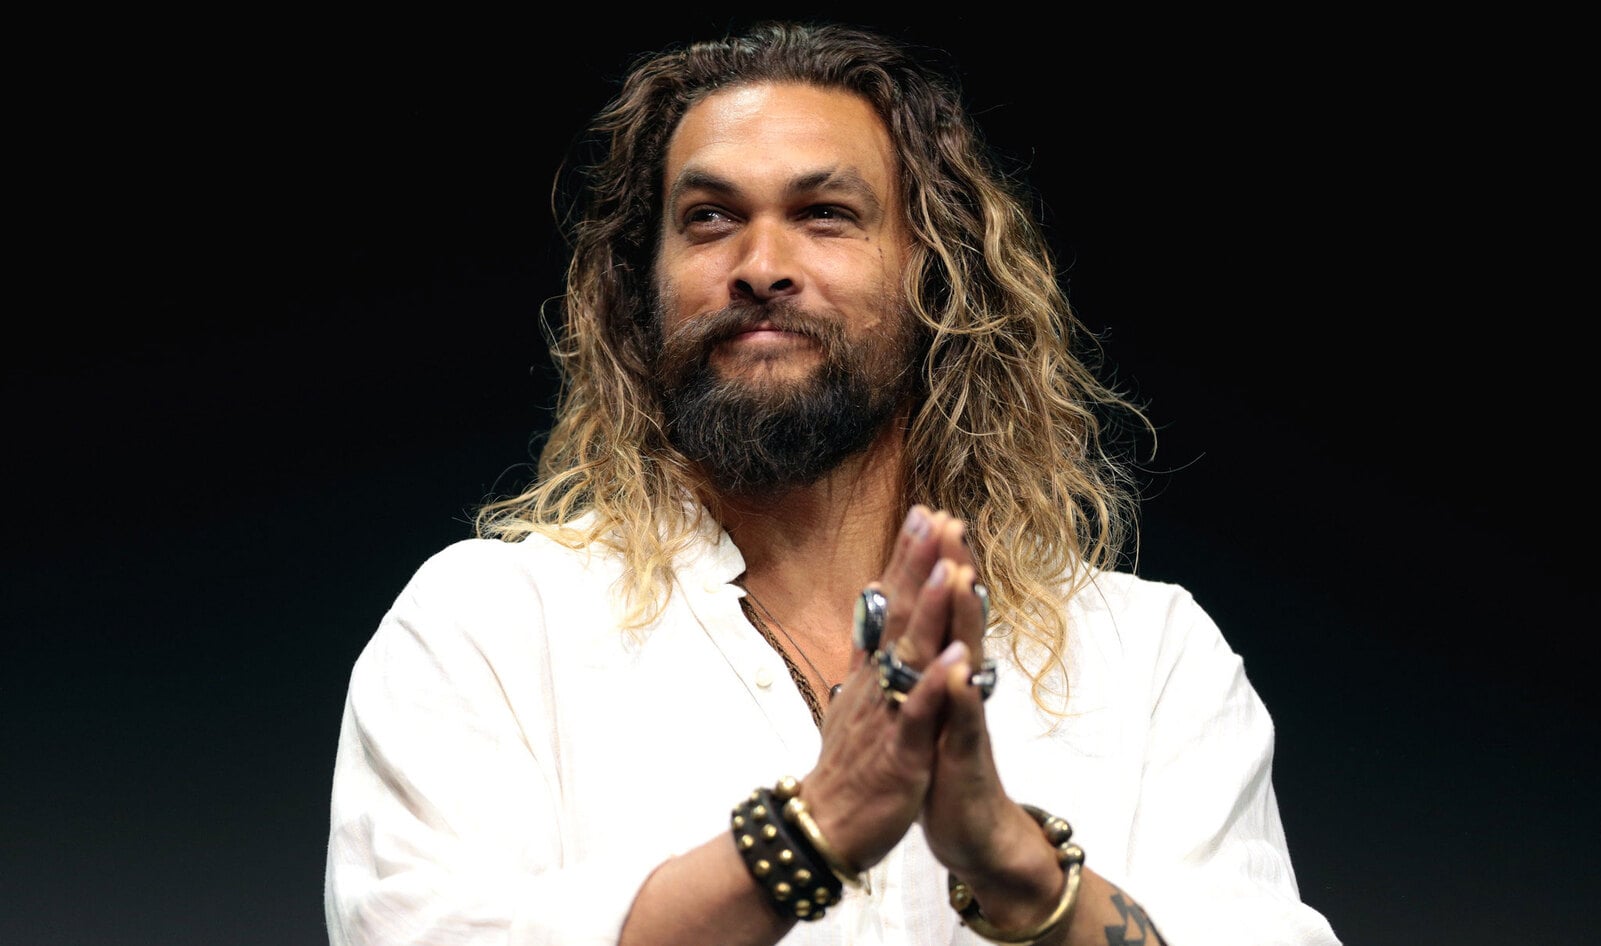 If It Isn’t Your Favorite Vegan Beer Already, Jason Momoa’s New Guinness Commercial Should Do the Trick